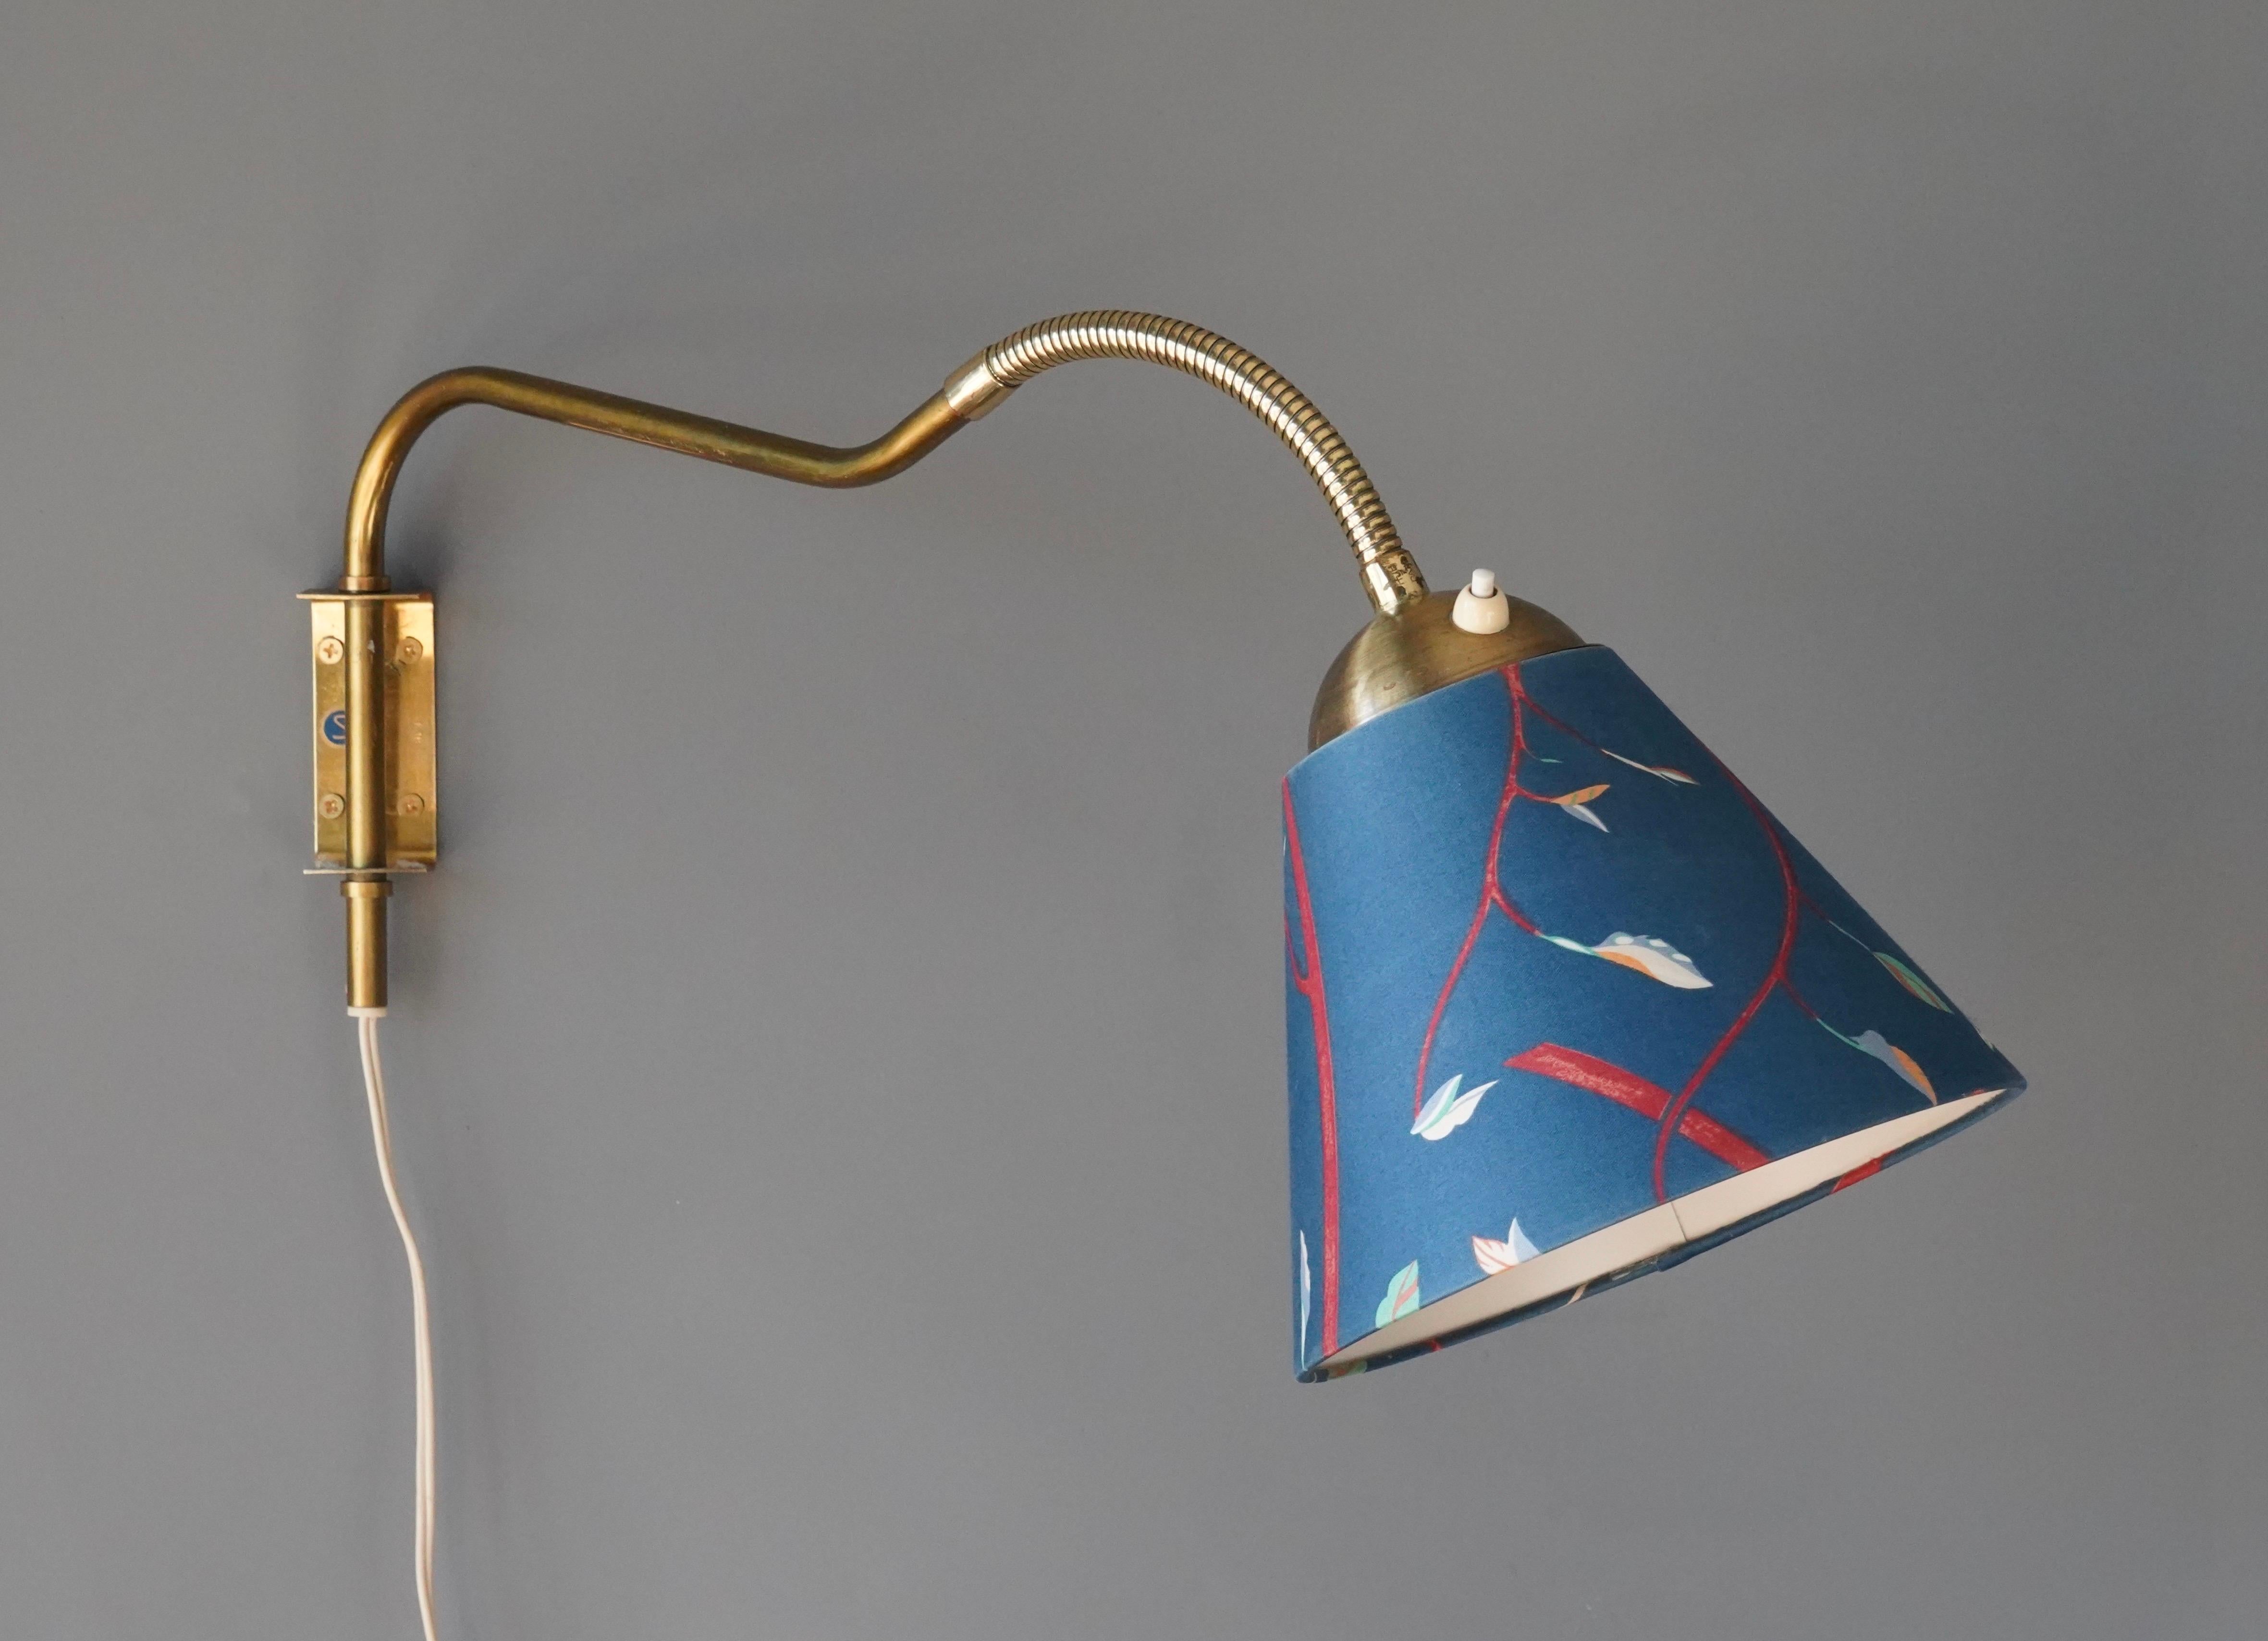 An adjustable organic wall light. In brass, with a vintage lampshade.

Dimensions are as pictured.